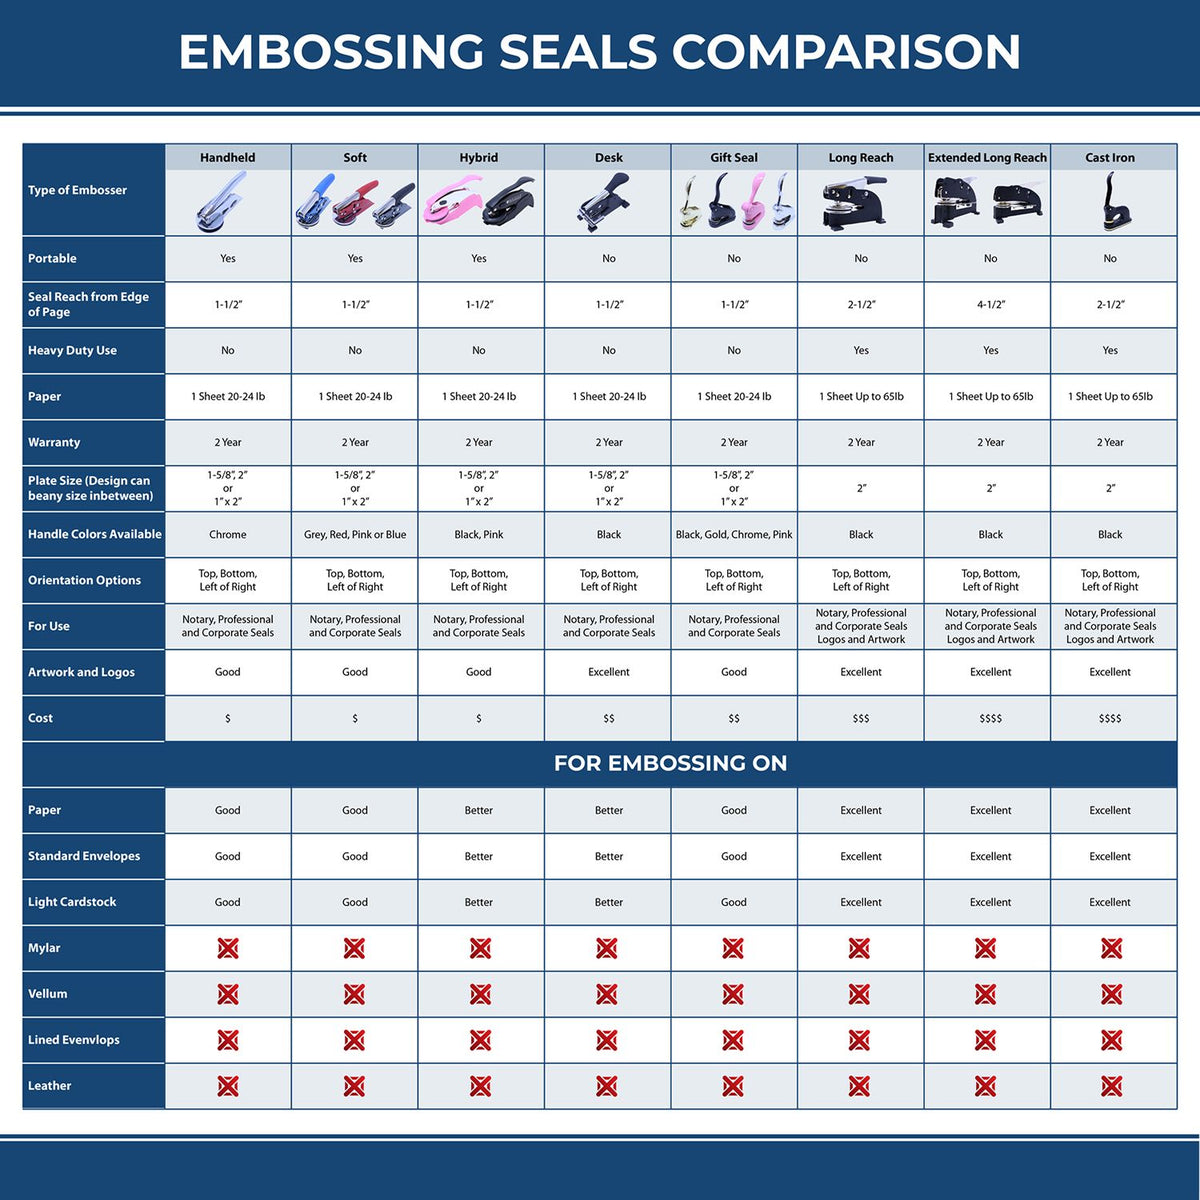 A comparison chart for the different types of mount models available for the Hybrid Maine Engineer Seal